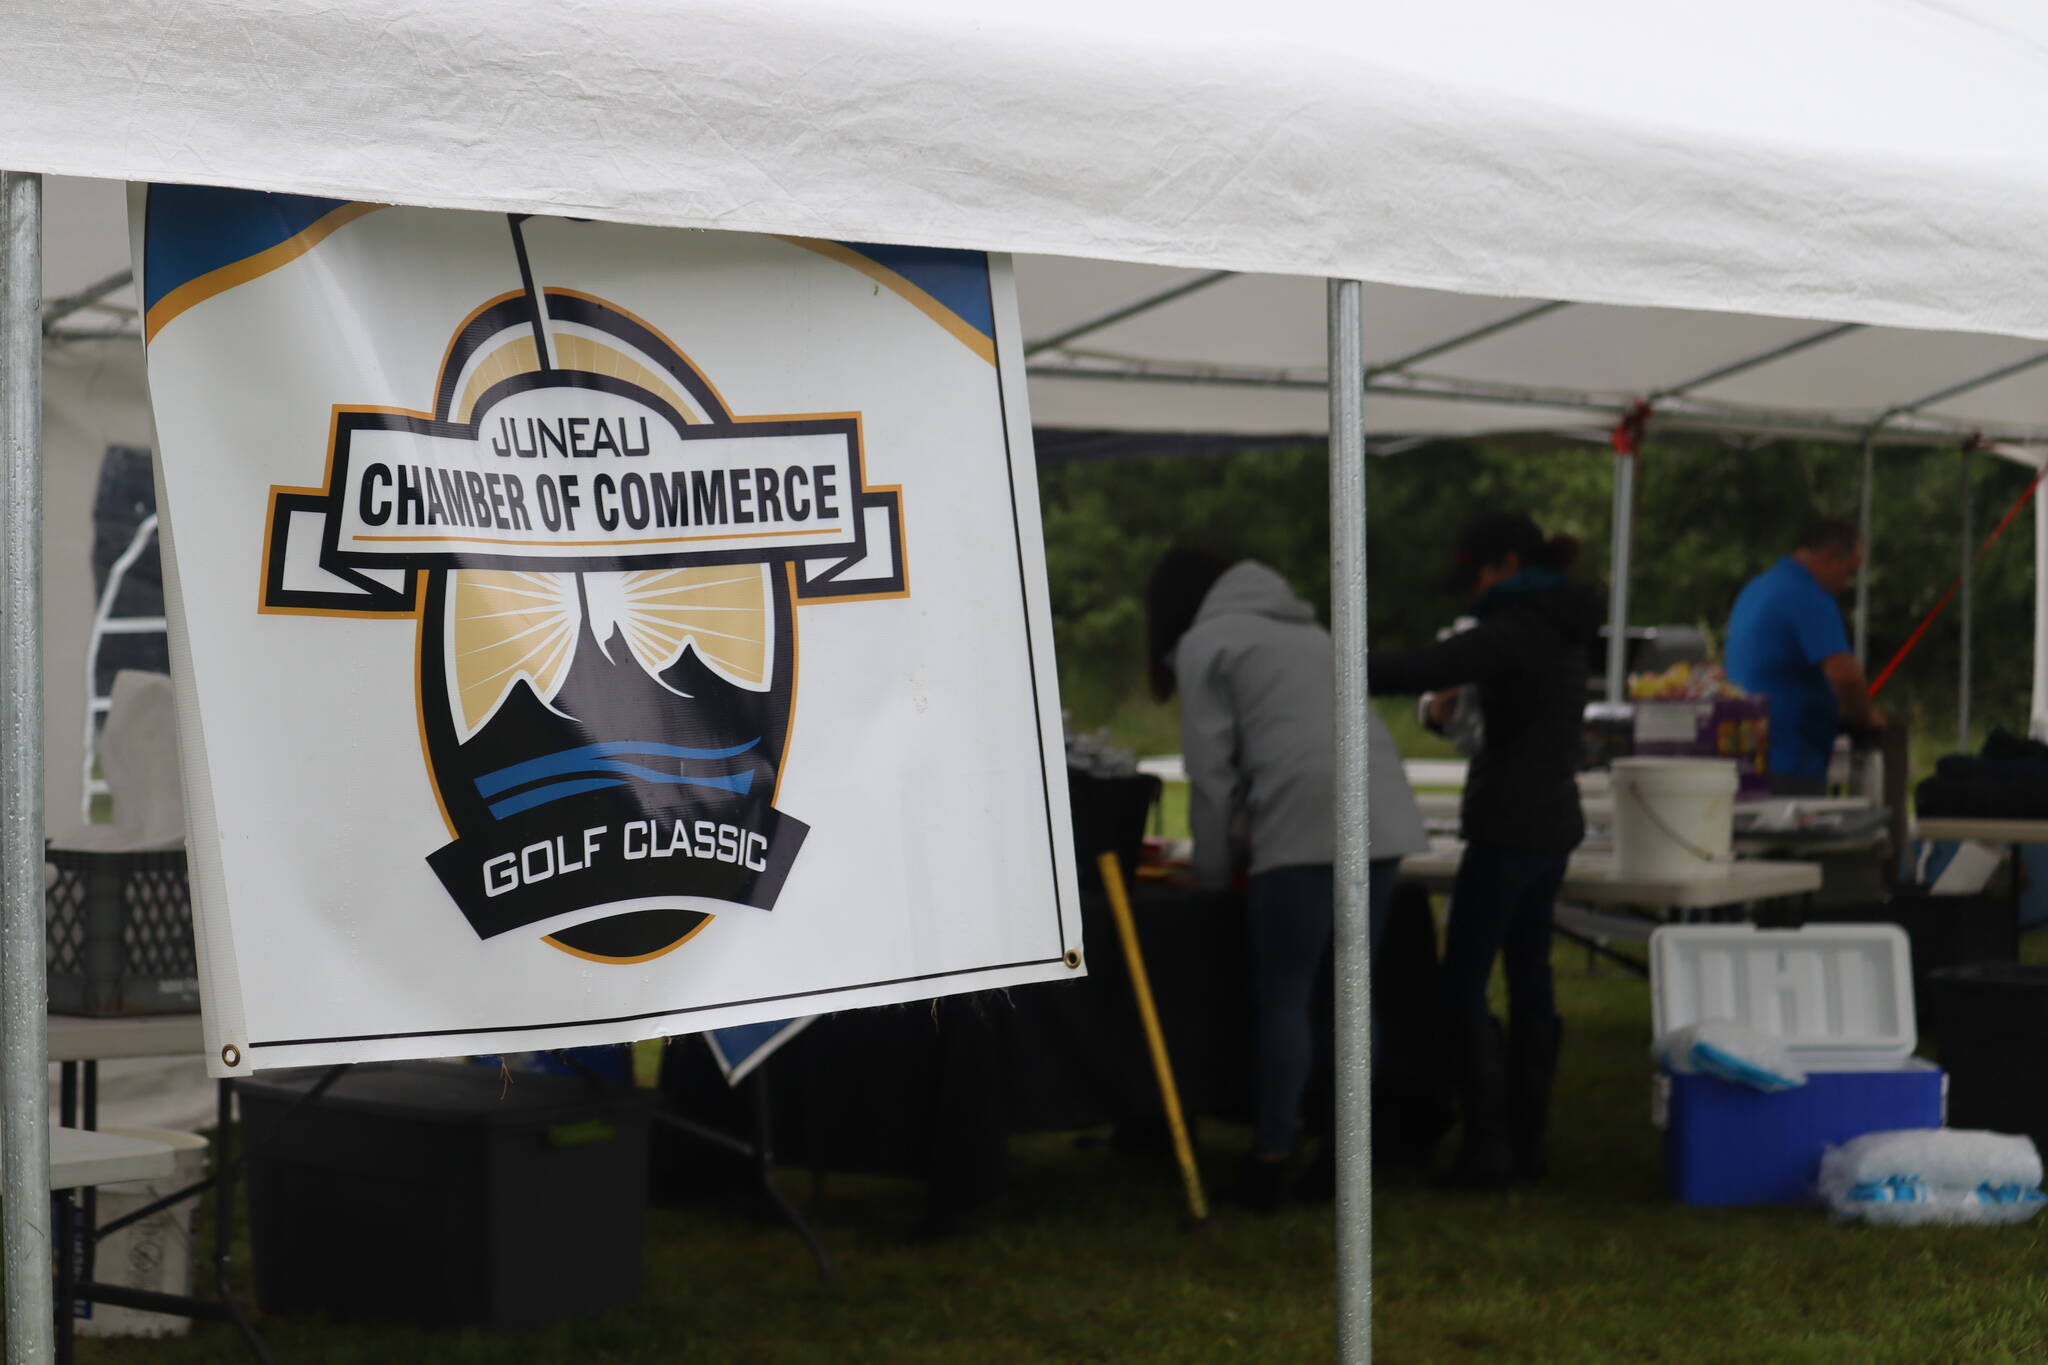 The 8th Annual Juneau Chamber of Commerce Golf Classic took place on Saturday, July 30 at the Mendenhall Golf Course. While this year’s event fell on bad weather, teams still came out to compete for great prizes and a great cause. (Jonson Kuhn / Juneau Empire)